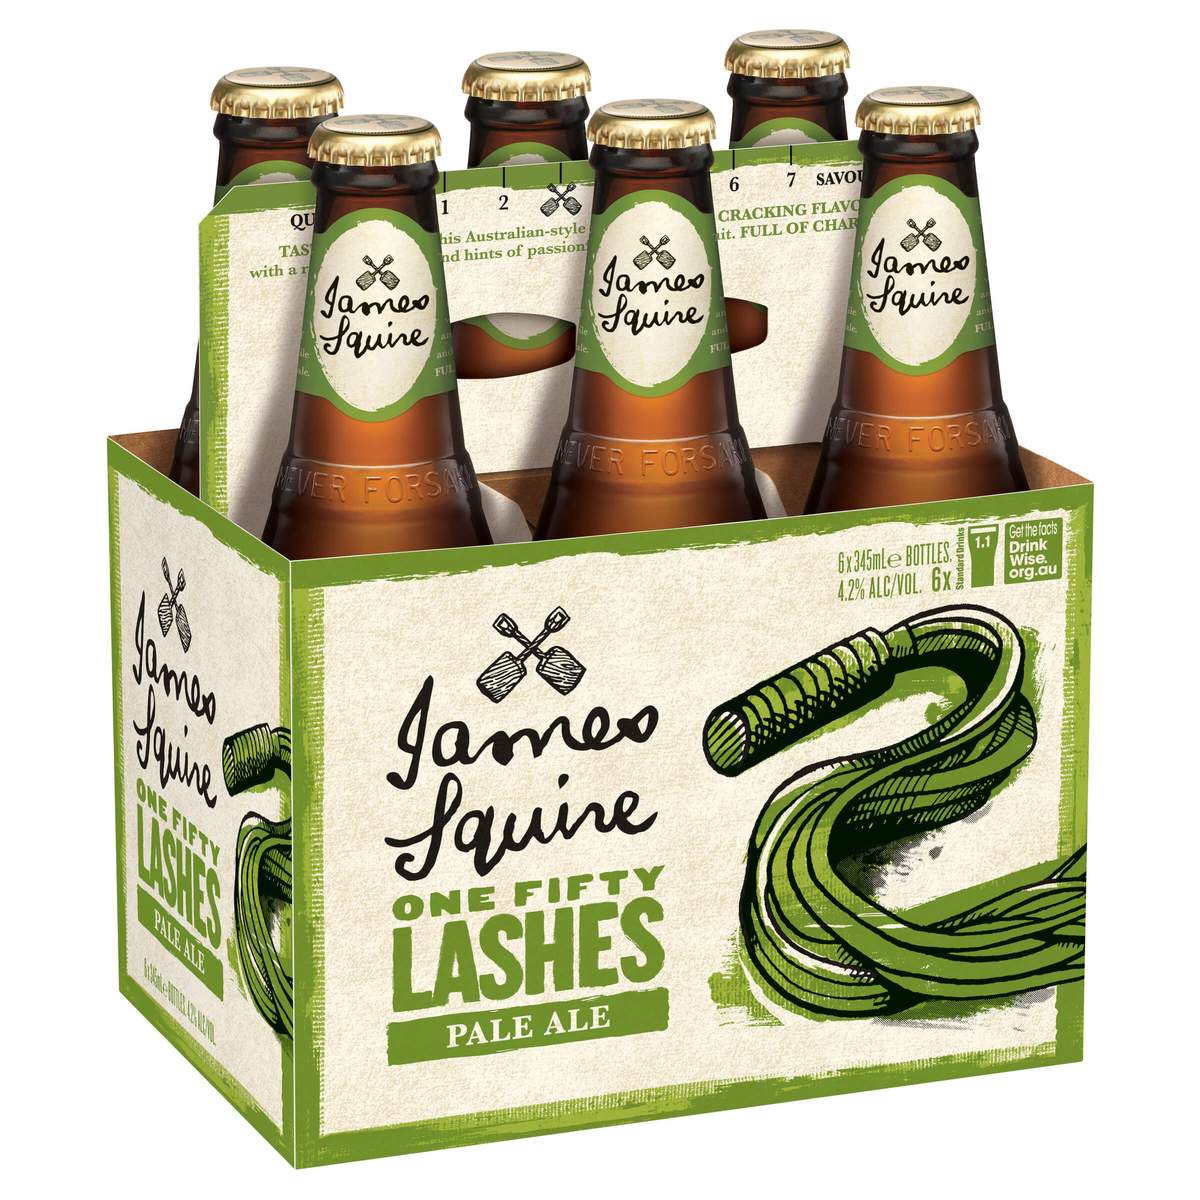 James Squire 150 Lashes (5 x 345ml)